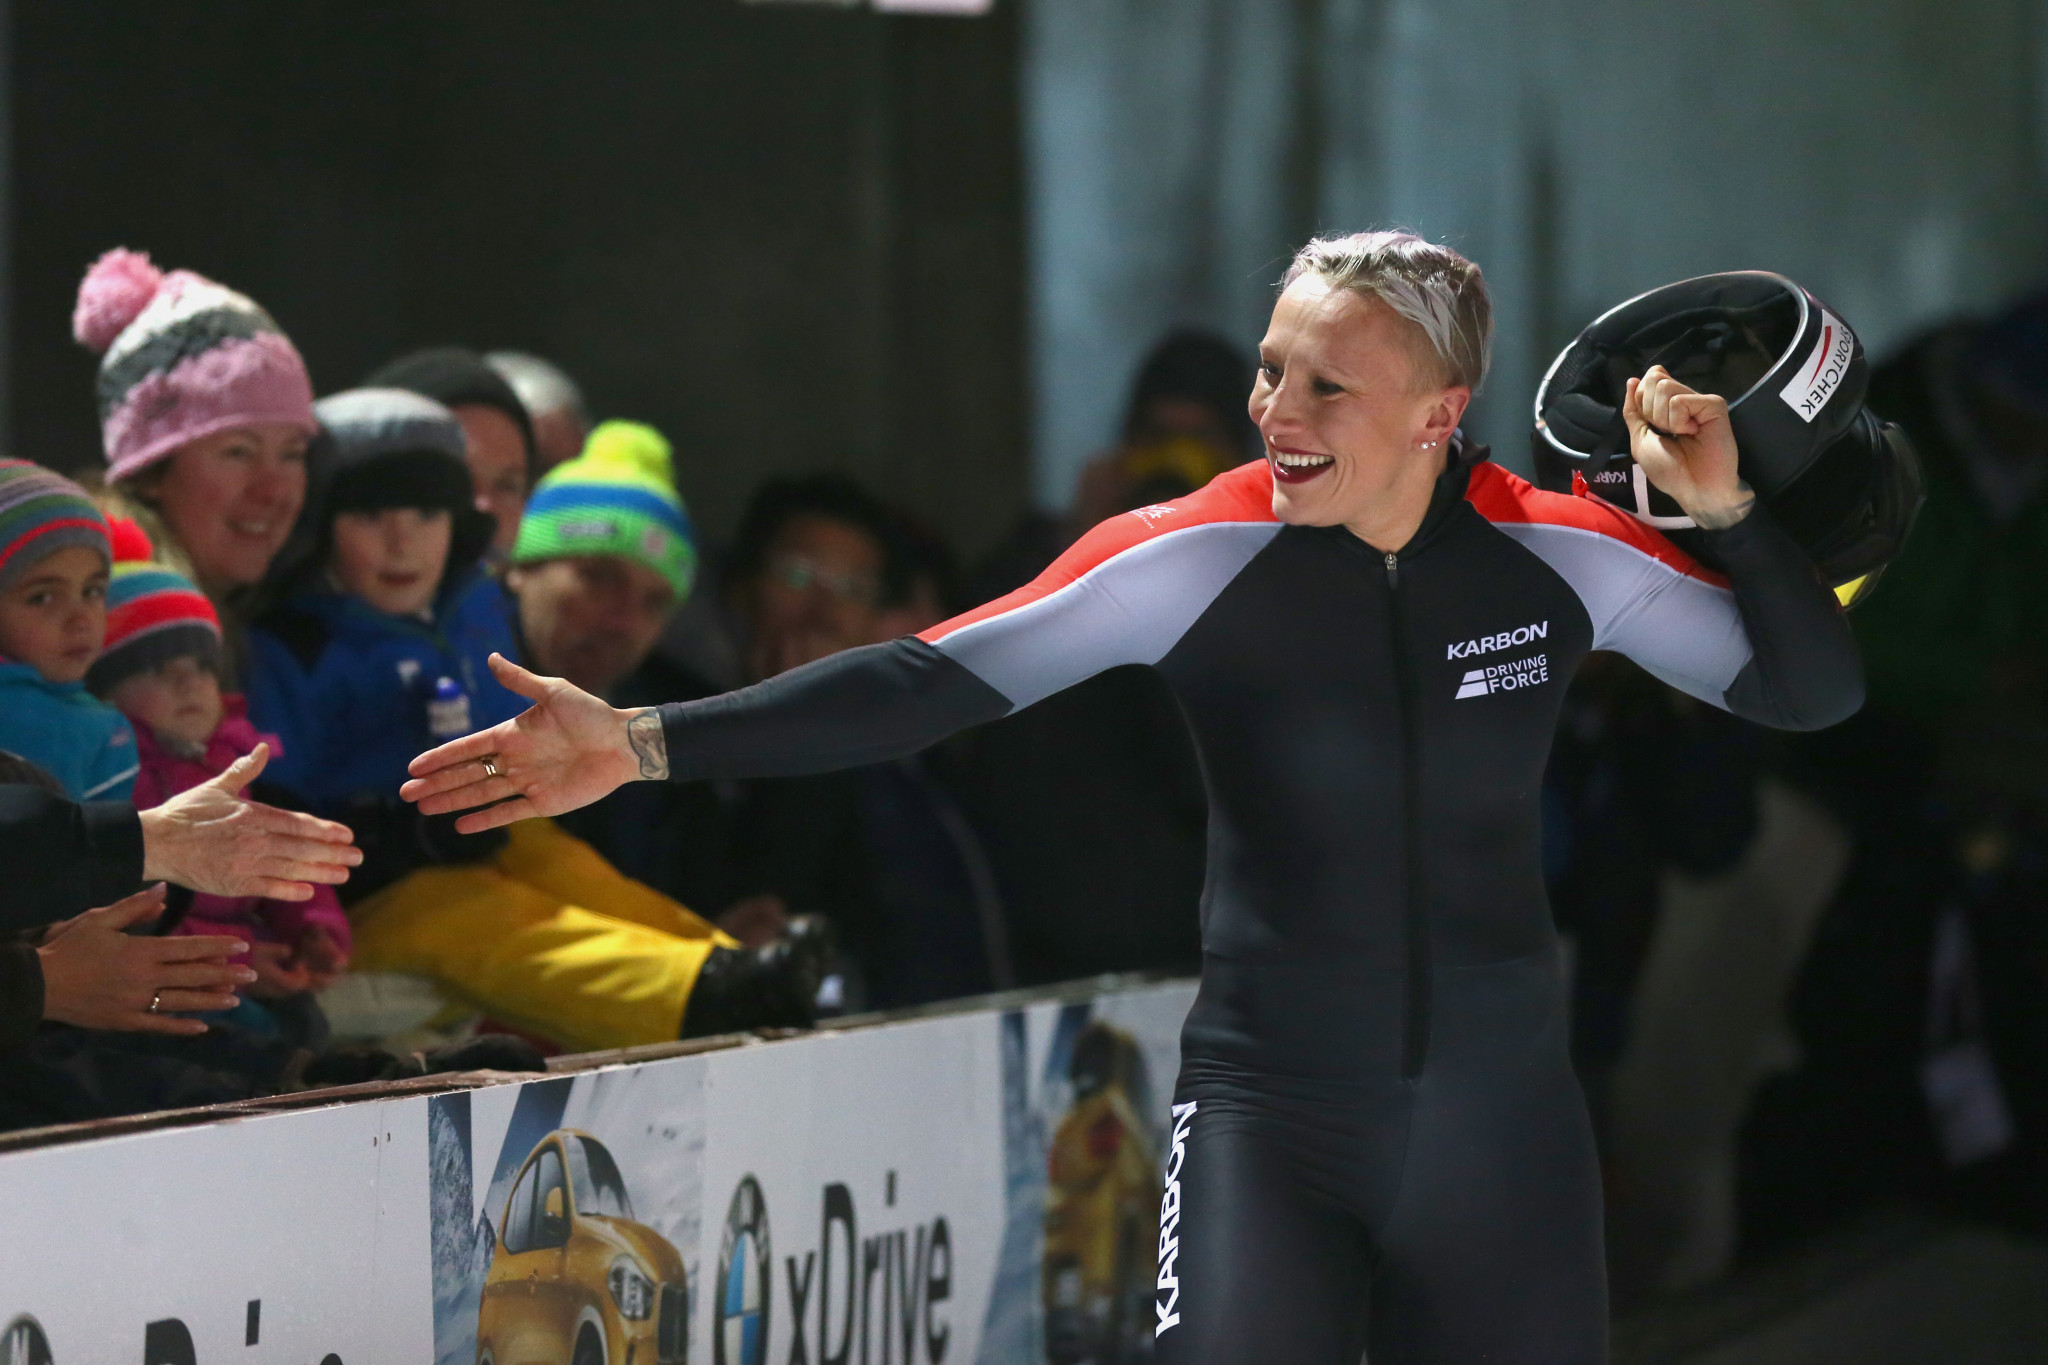 Humphries "heartbroken" after exit from Canadian bobsleigh team